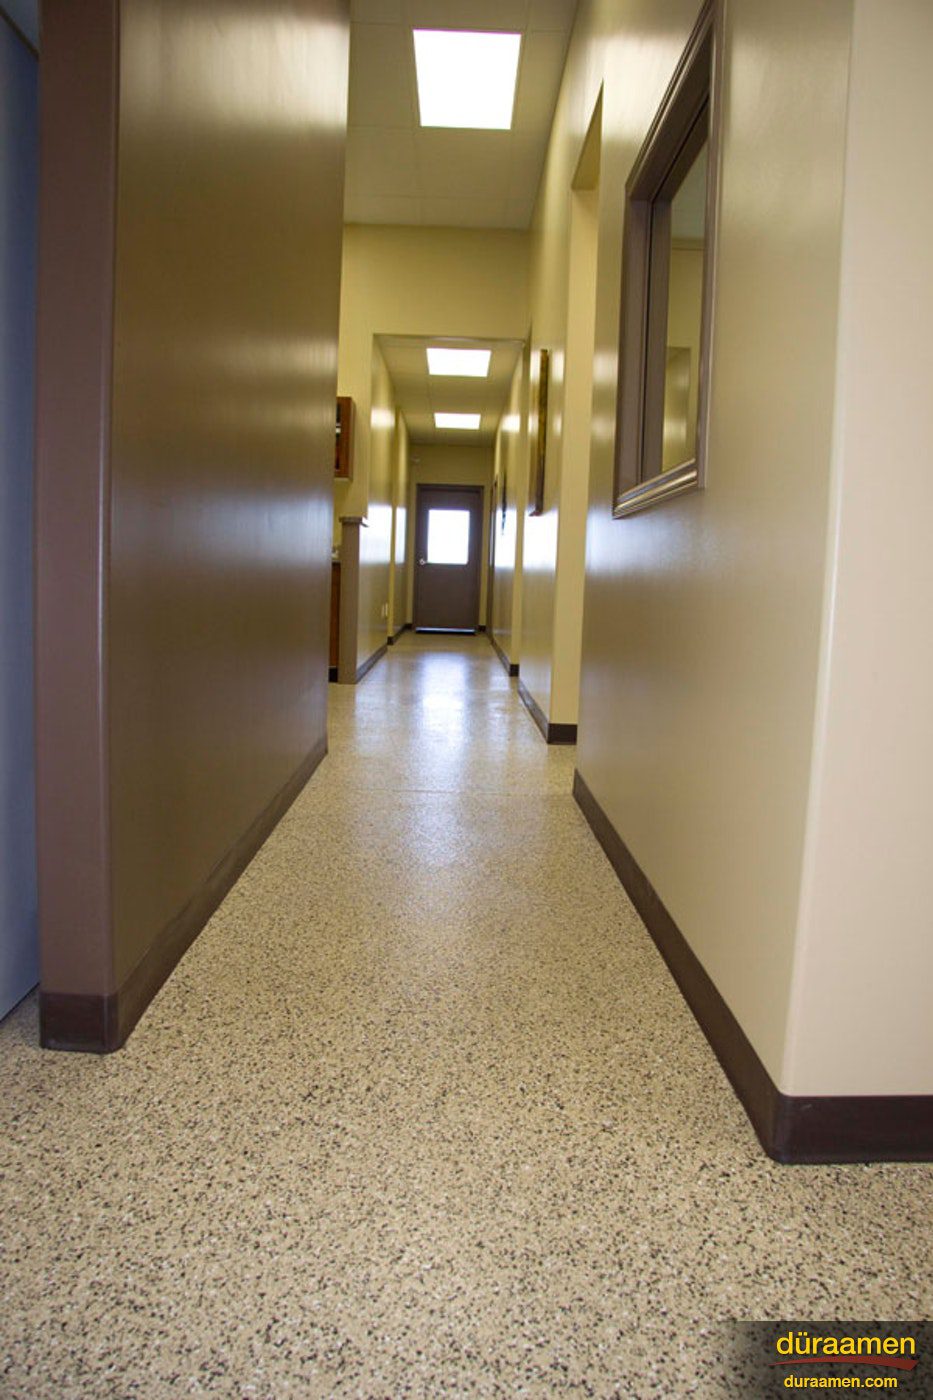 Hallways as well as animal holding cells and the ER utilize garage floor epoxy coatings in theis veterinary clinicnbspEpoxy Resin based Vinyl Chips Flooring in Veterinary Clinic | Duraamen Engineered Products Inc